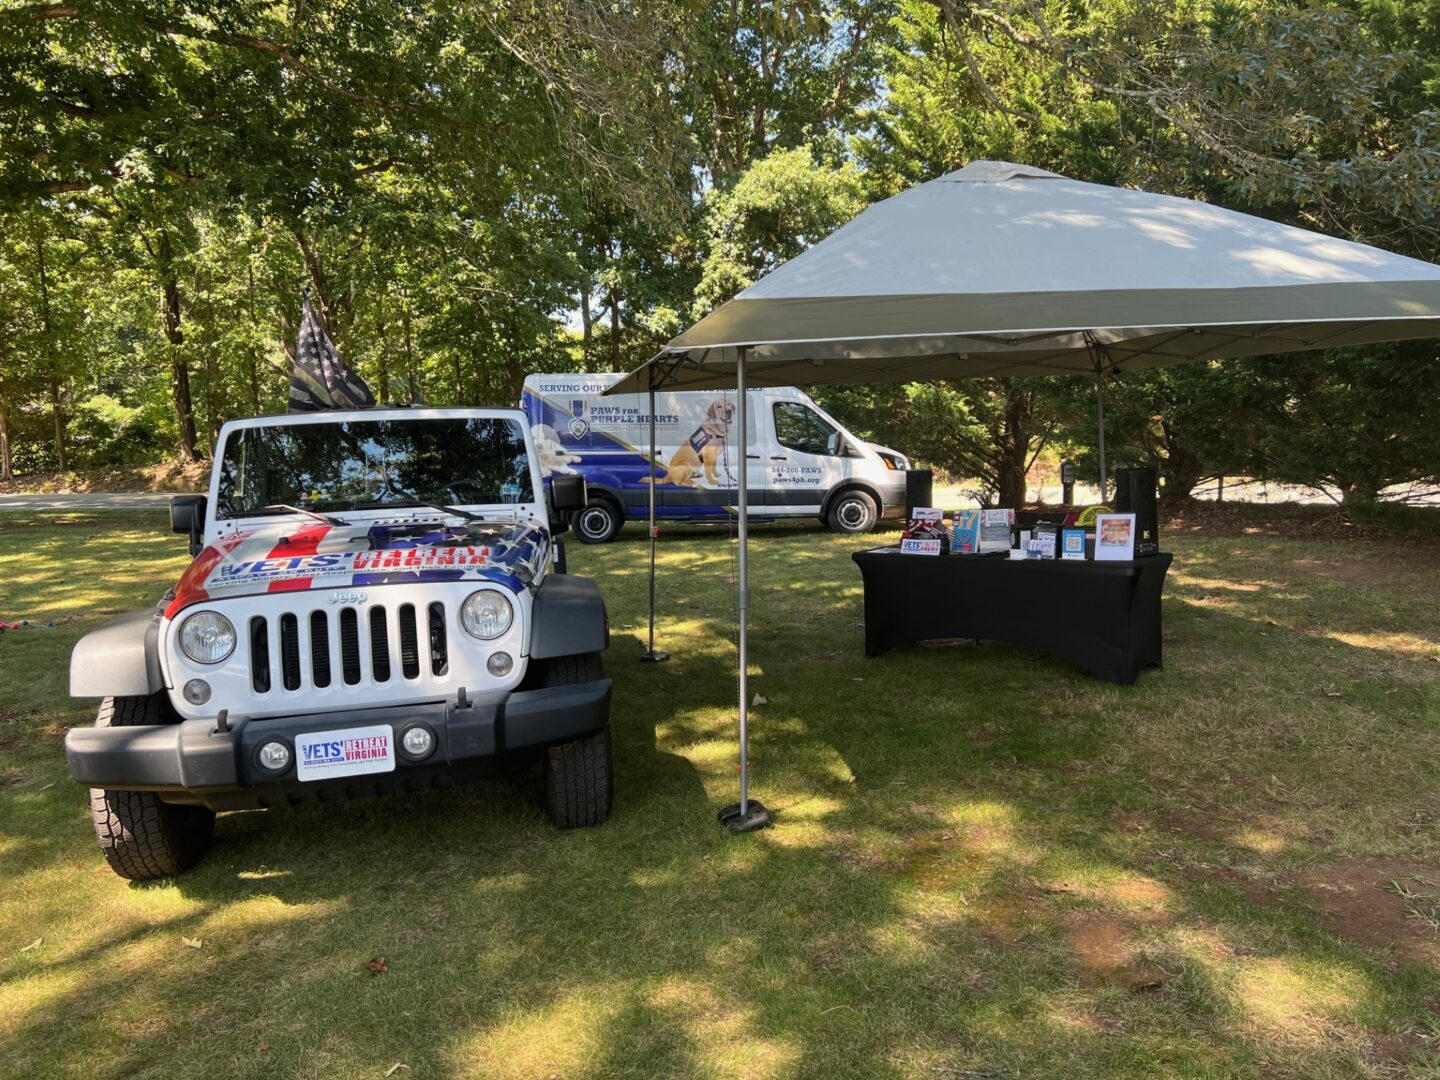 A jeep parked under a tent in a grassy area.